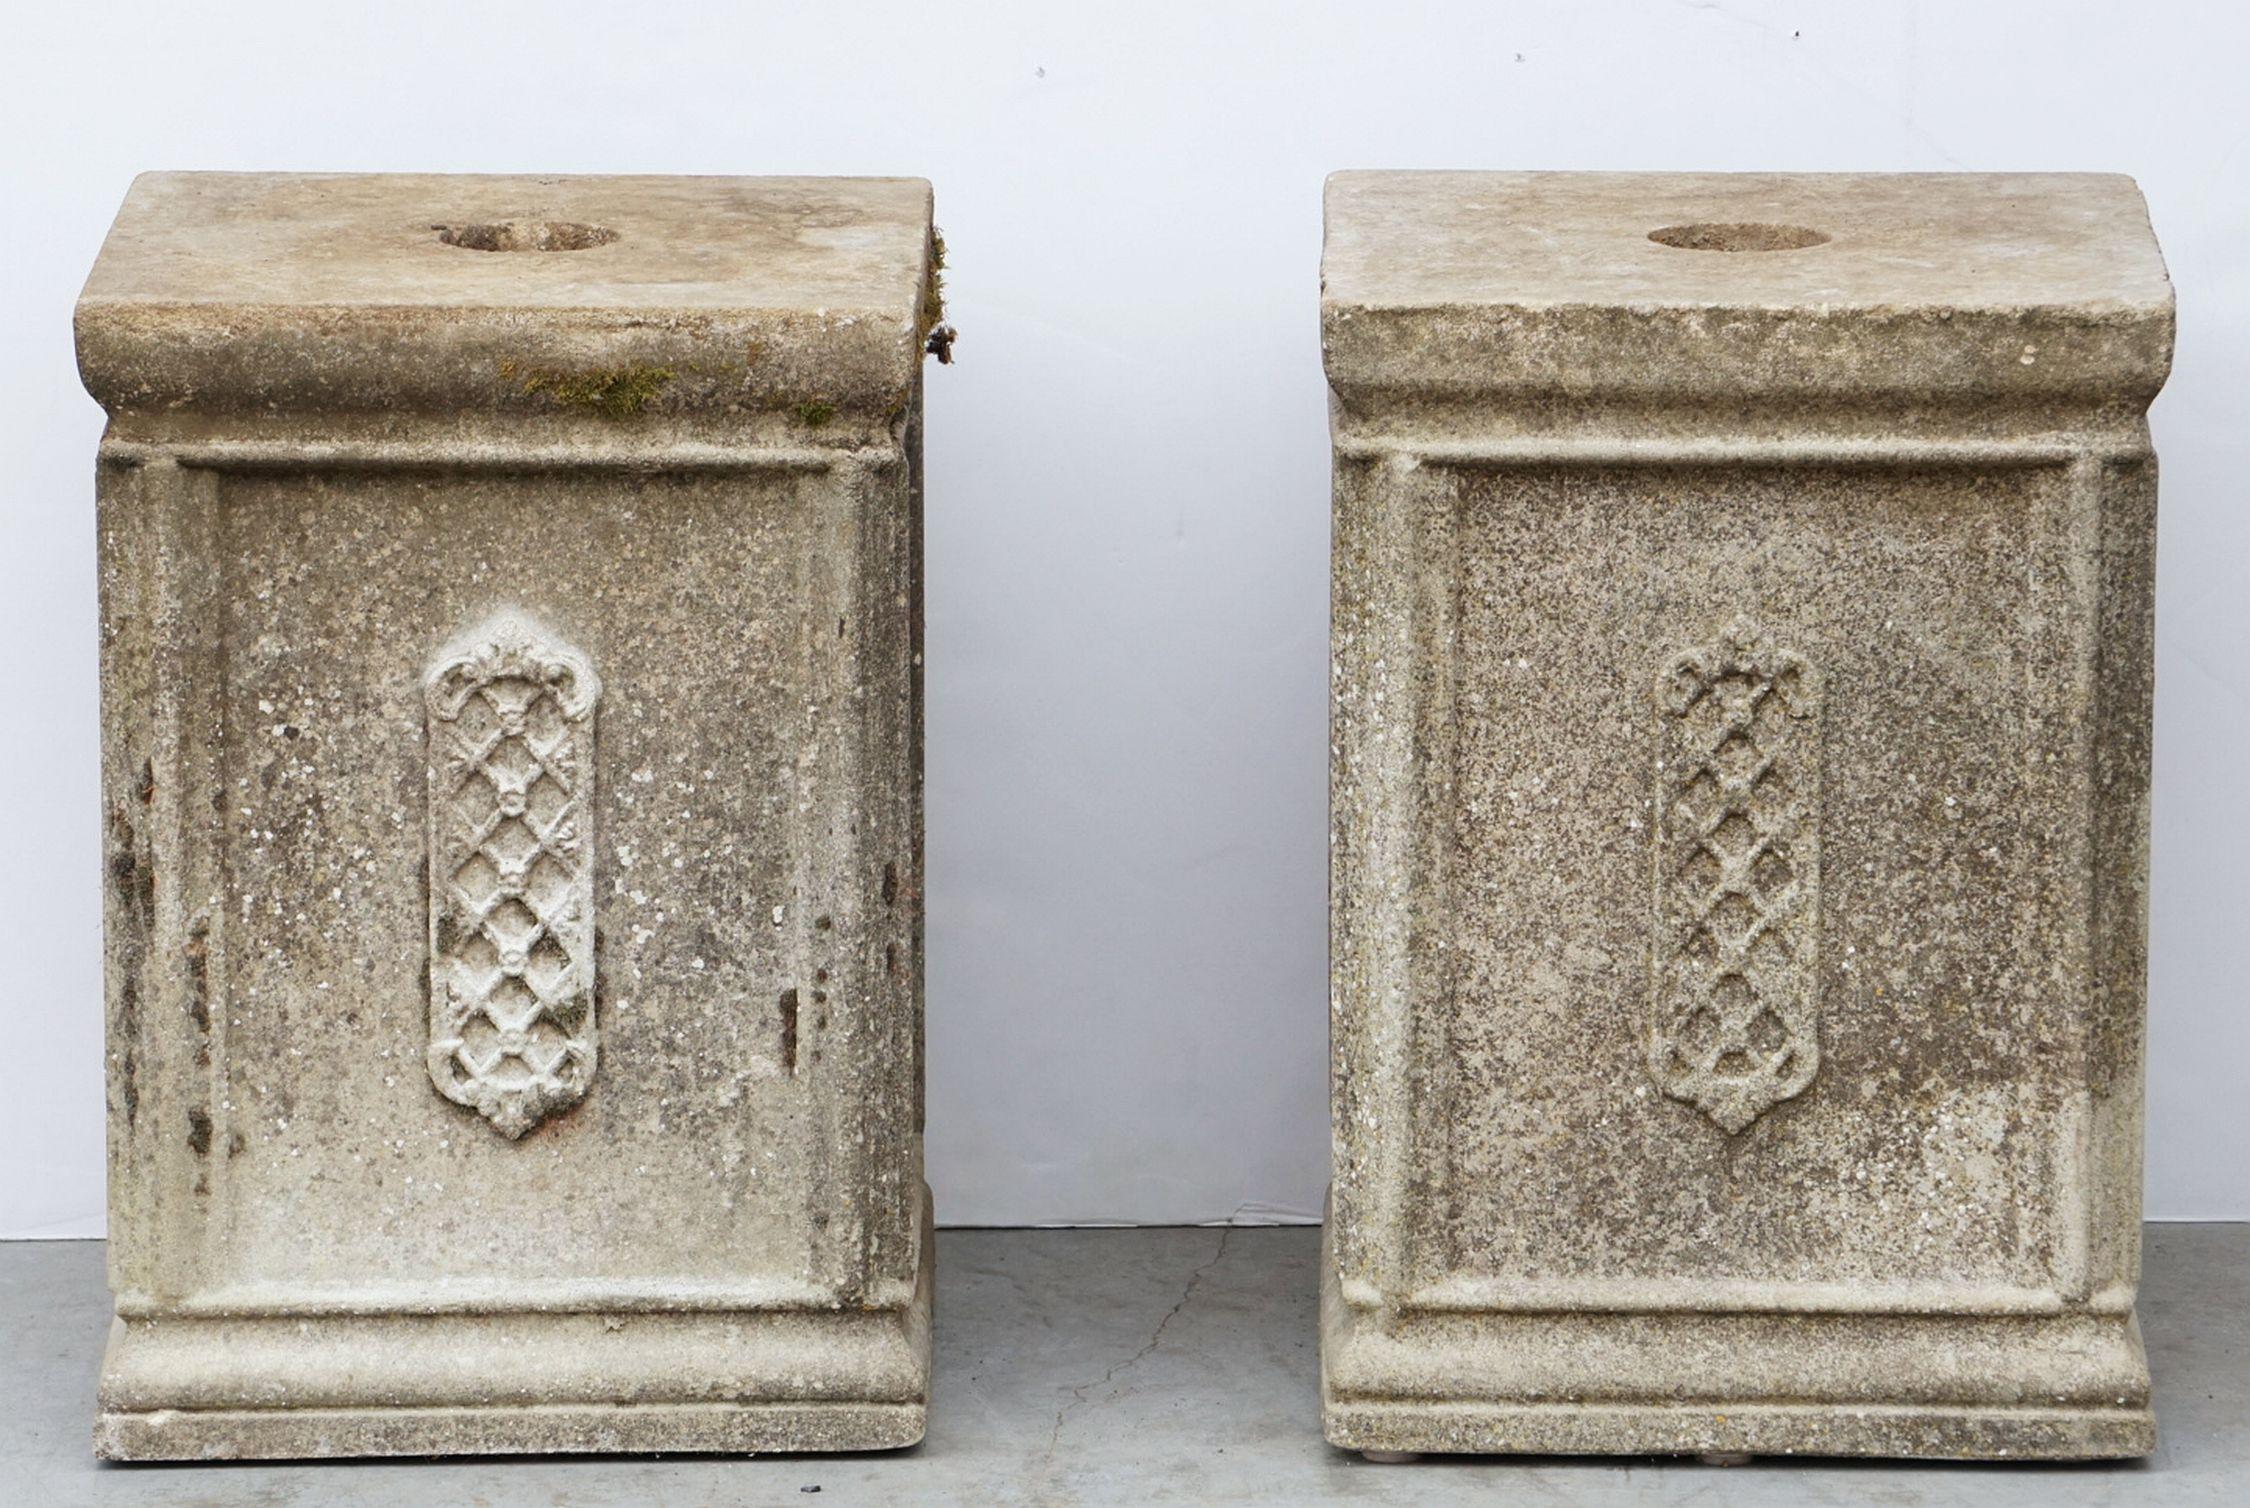 A fine pair of English four-sided column pillars or pedestal plinth supports of composition stone - for urns, planters, or statuary.
Each pedestal plinth featuring a stylish Gothic or Celtic design on each facing side.

Perfect for an indoor or